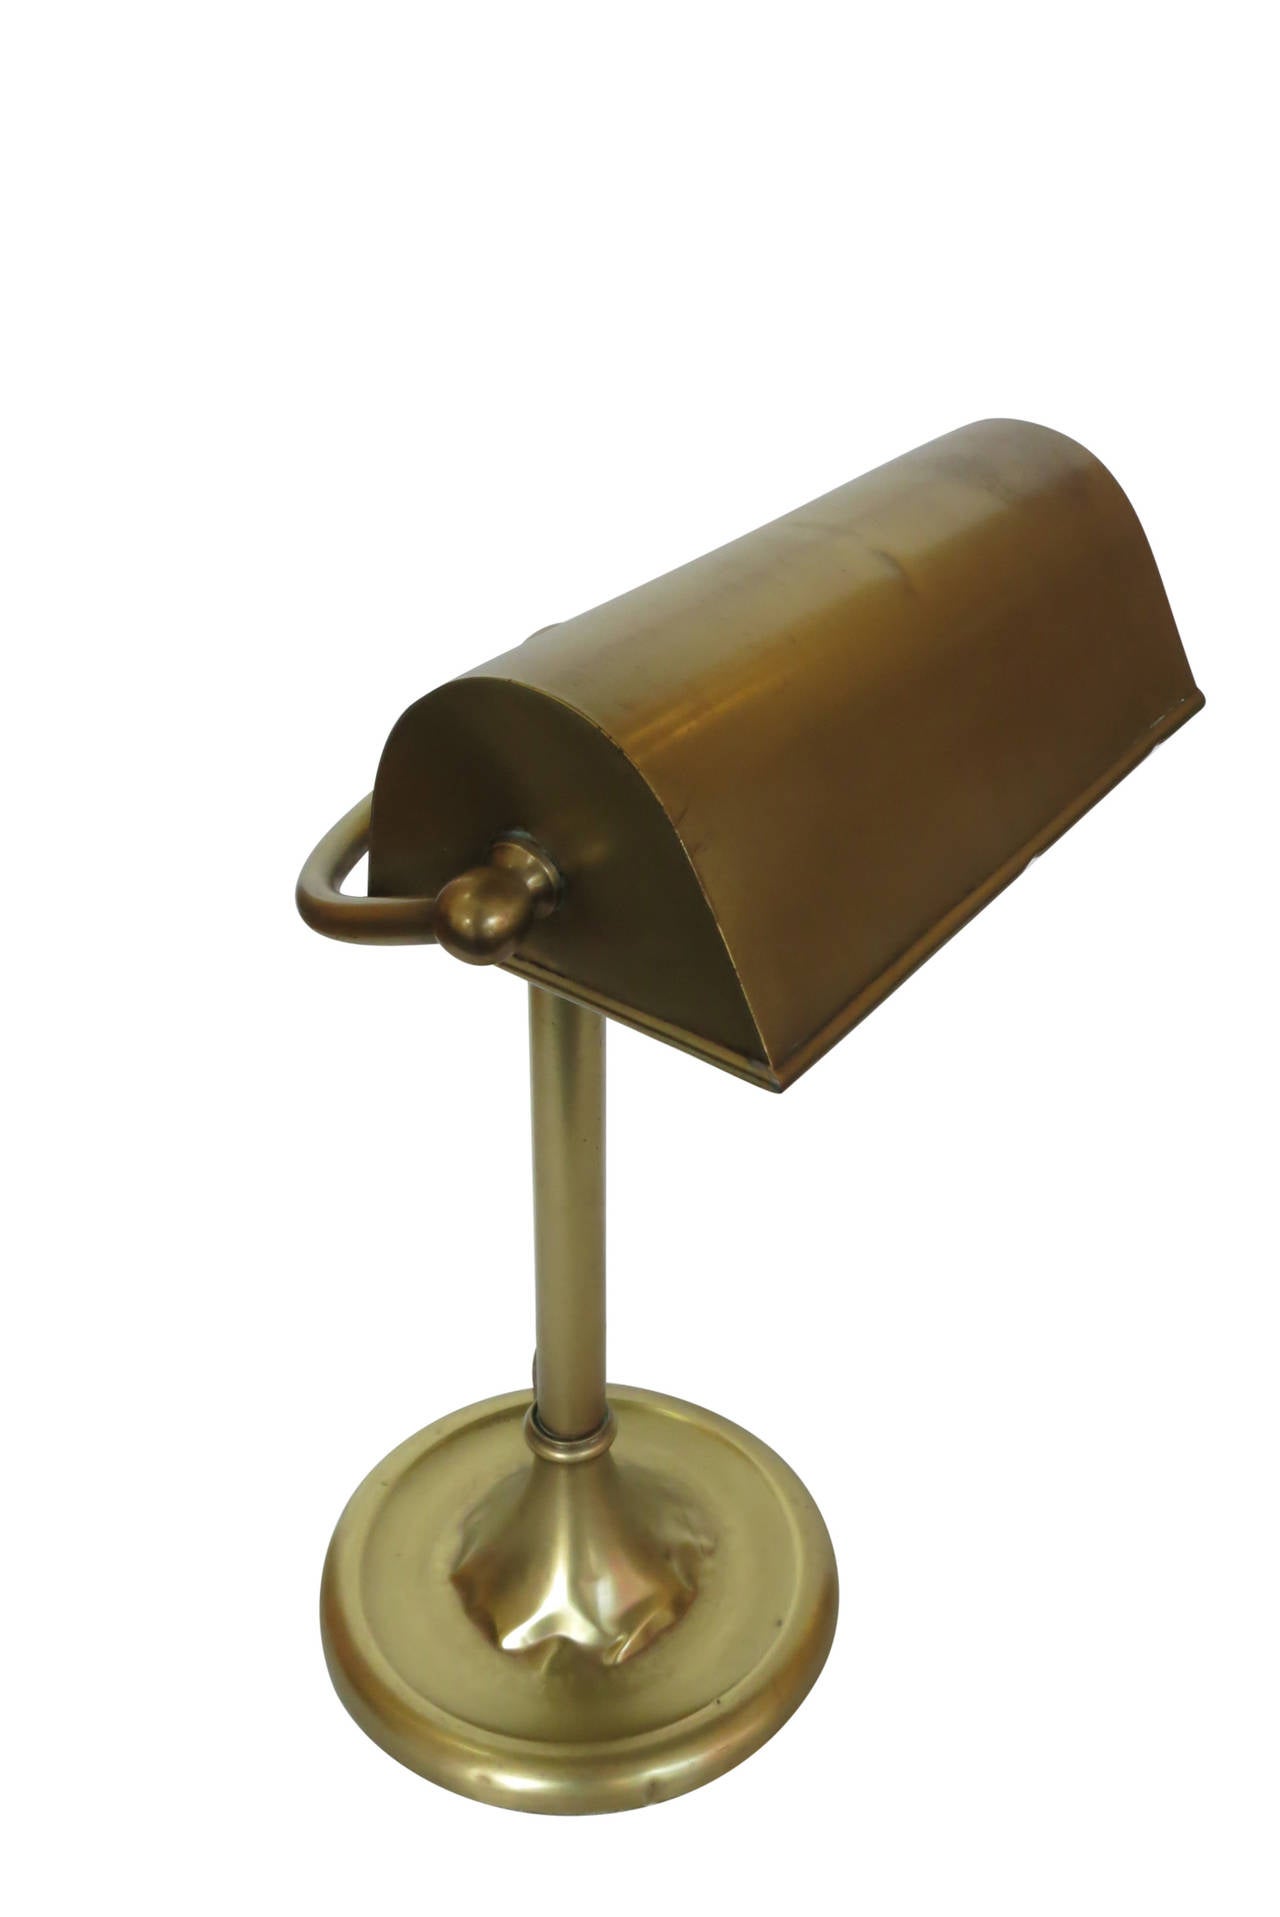 Made circa 1930, this traditional solid brass 